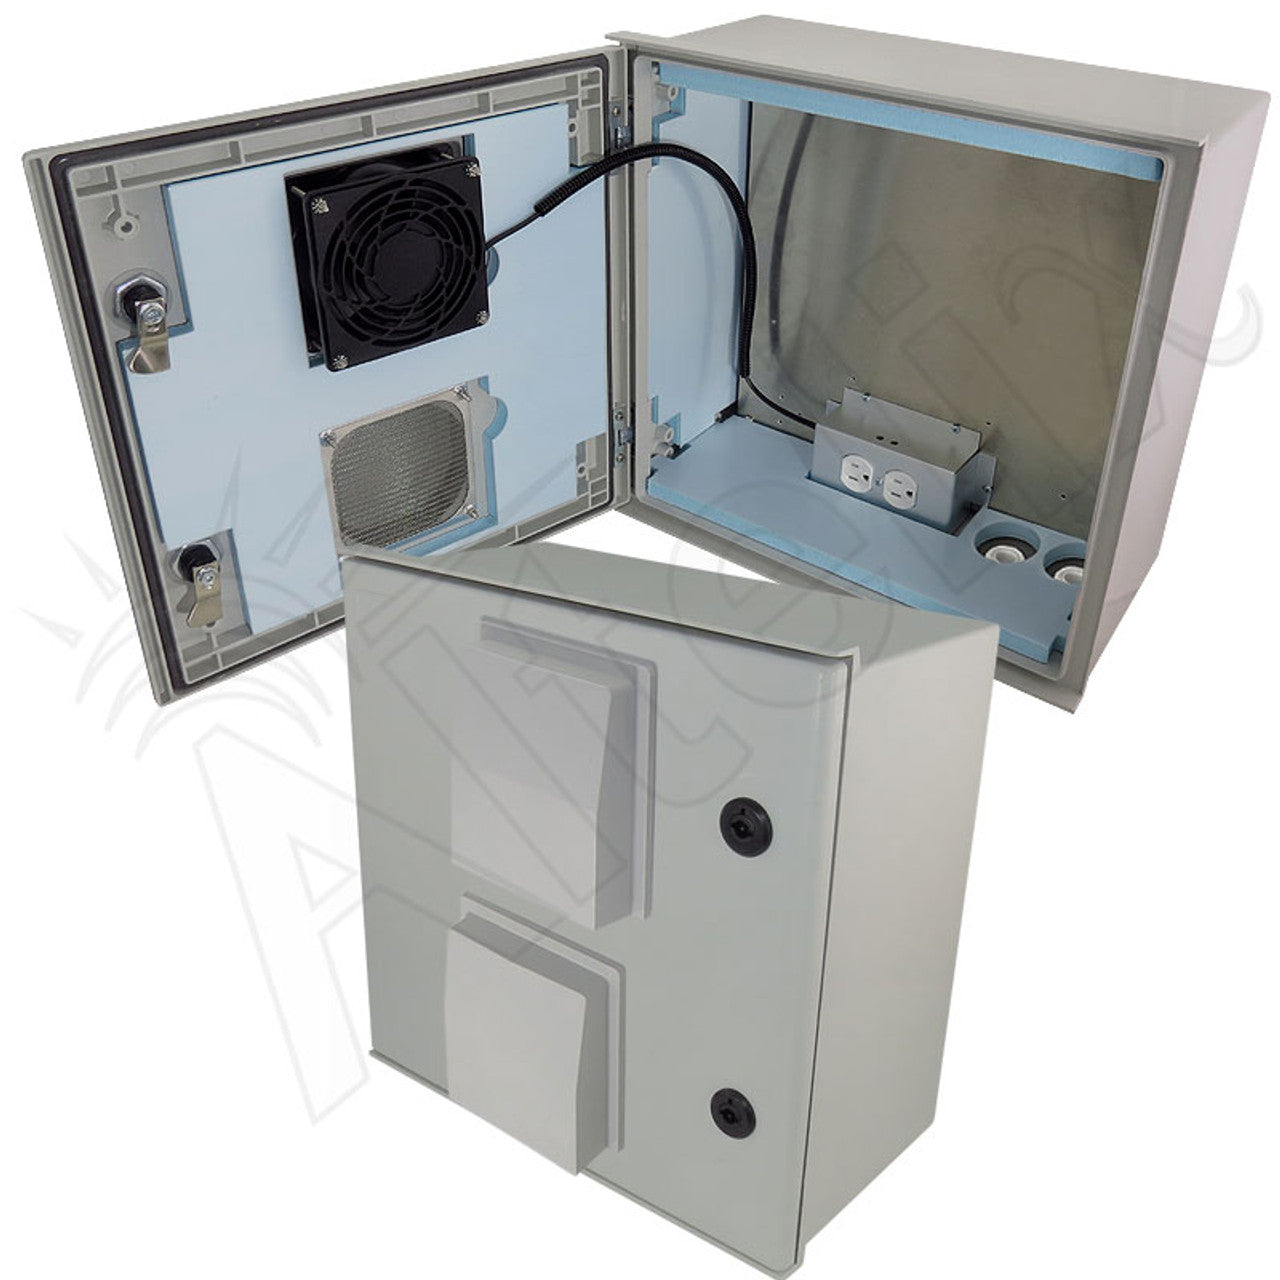 Altelix Vented Insulated Fiberglass Heated Weatherproof NEMA Enclosure with Cooling Fan, Heater and 120 VAC Outlets